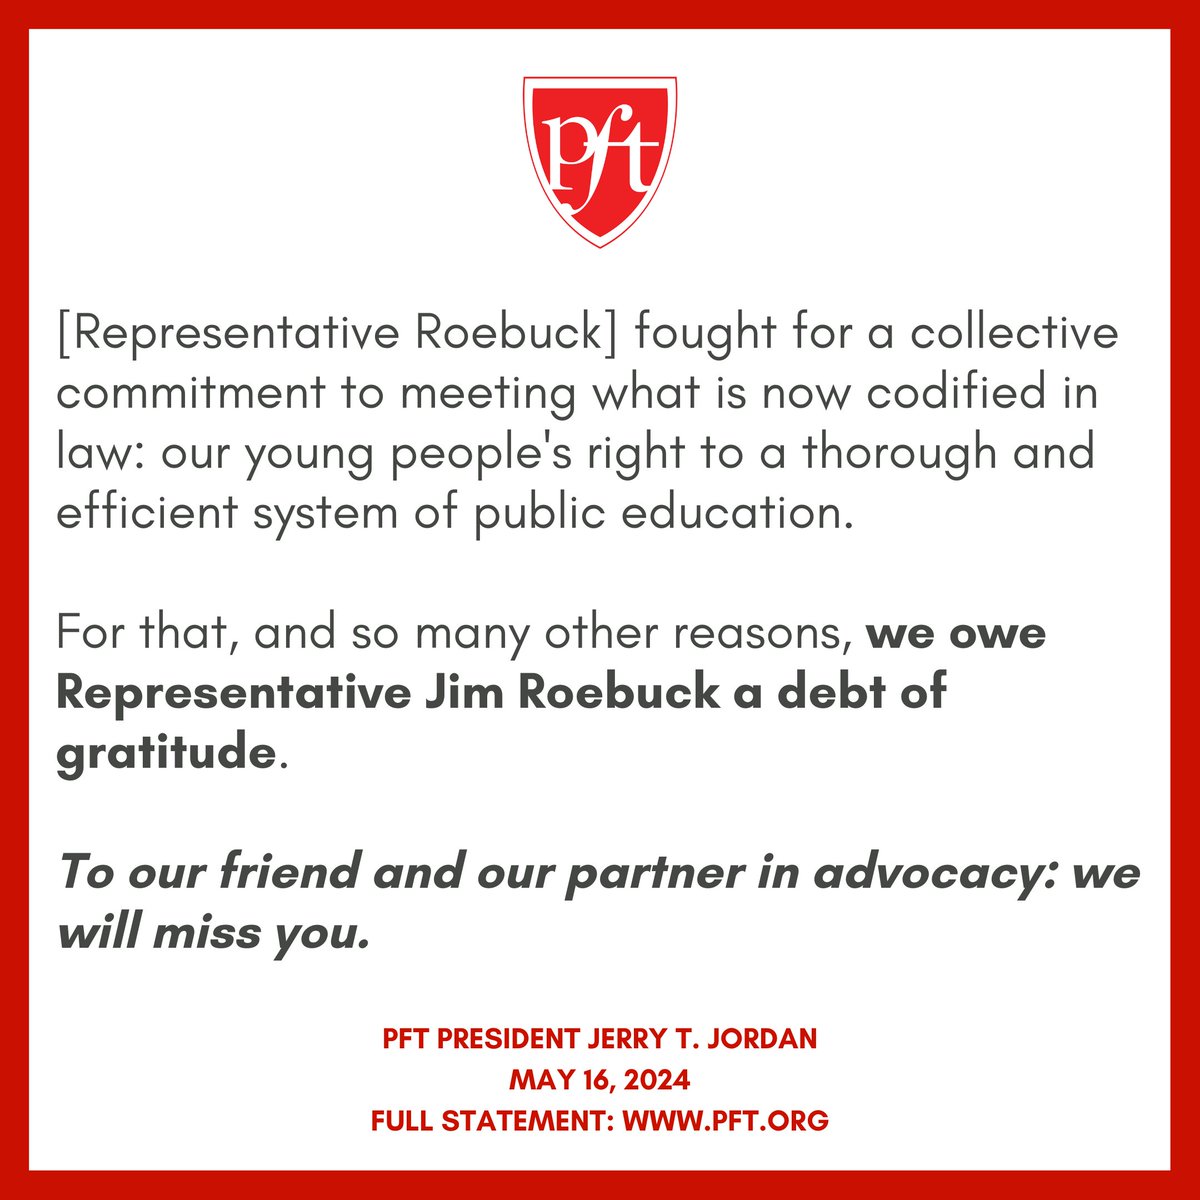 Representative Jim Roebuck's legacy won't be forgotten. We owe him a debt of gratitude, and we will miss him dearly. #phled